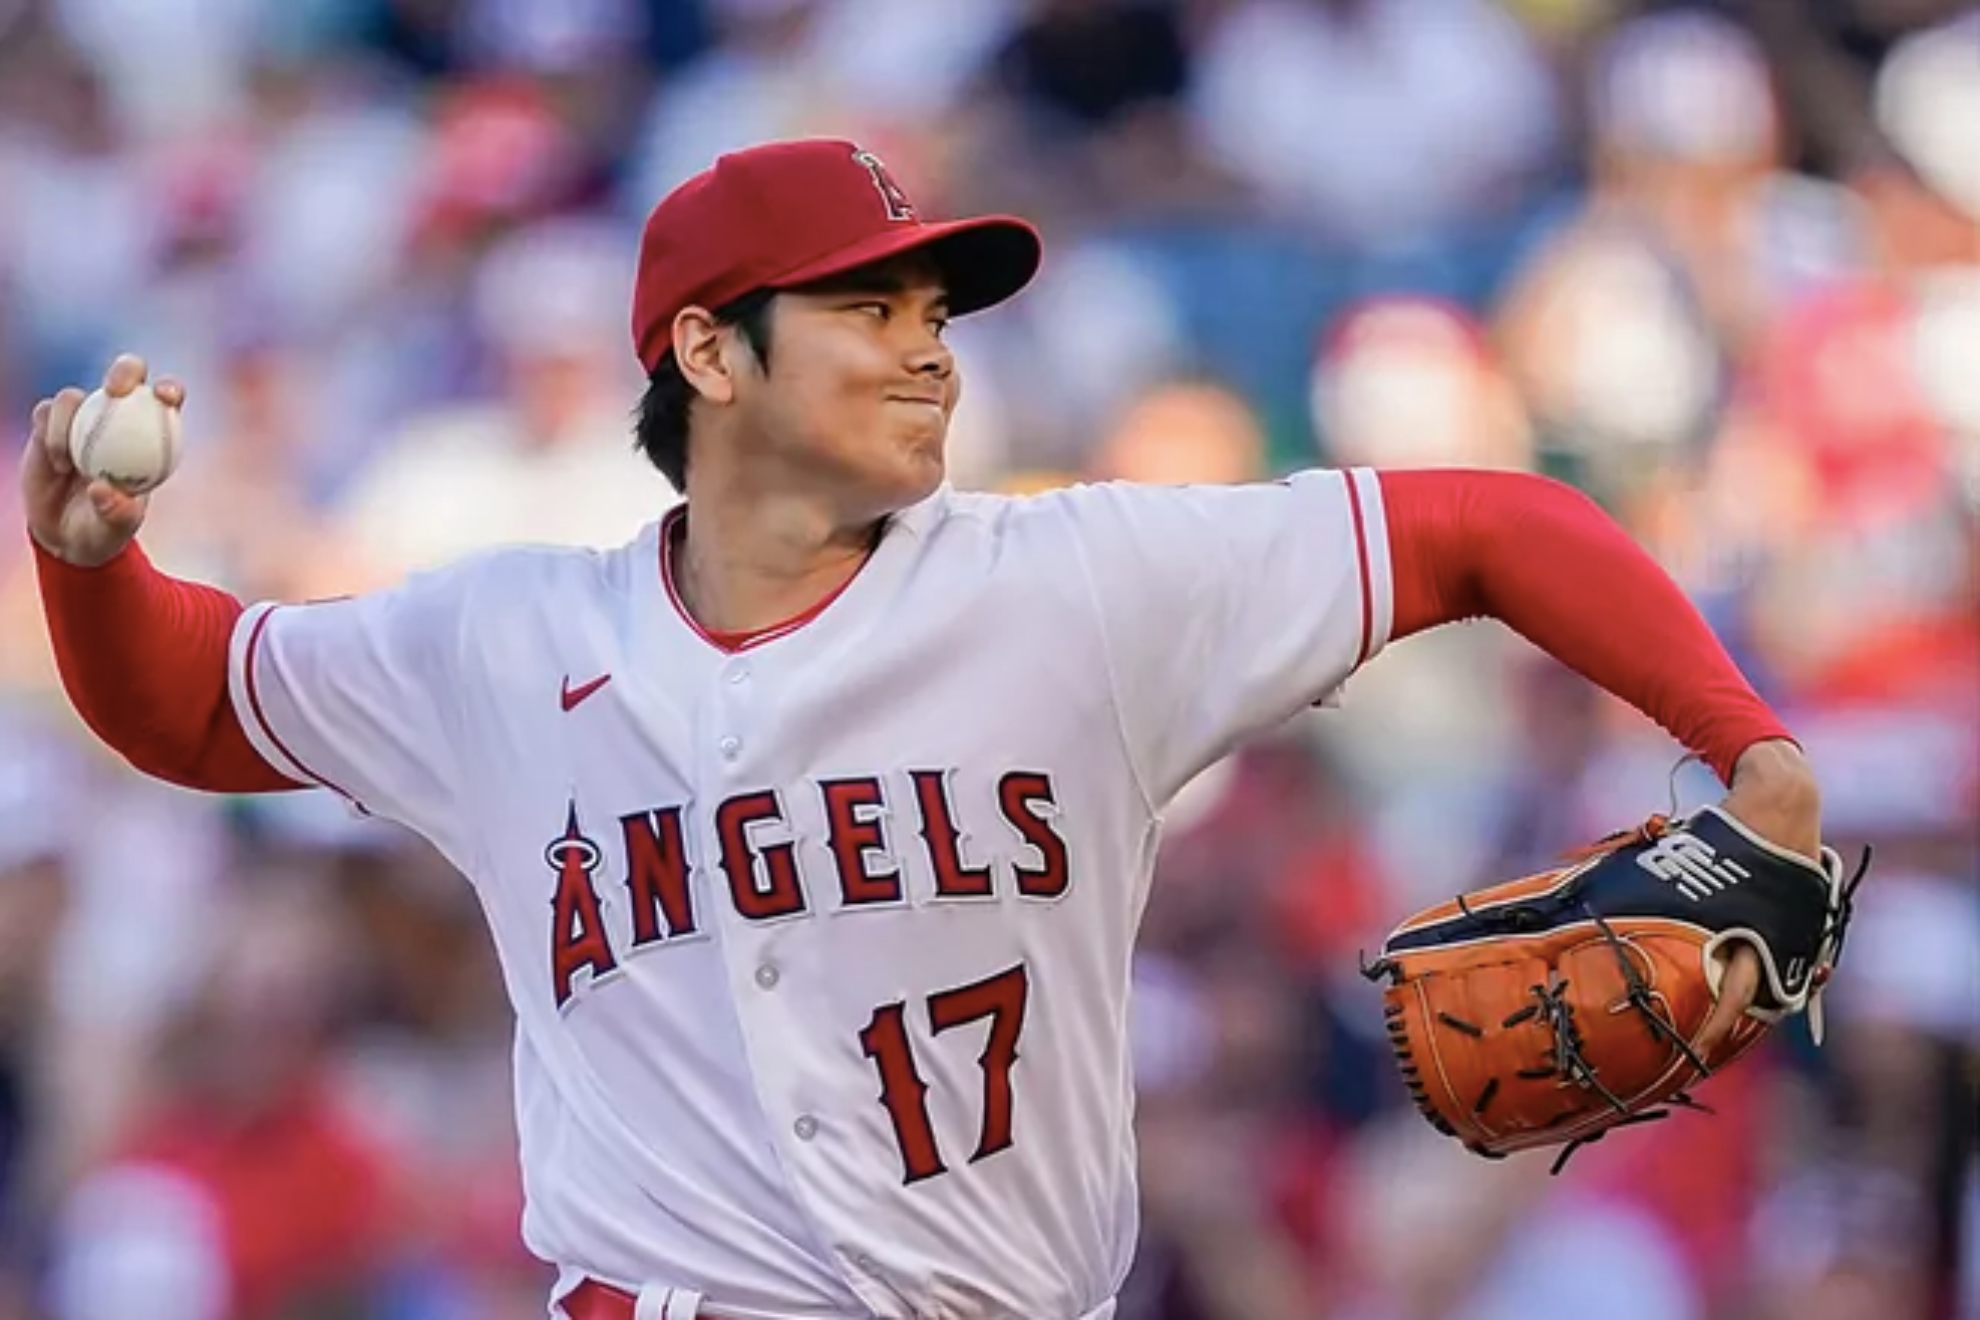 Shohei Ohtani may not pitch again until 2025 according to MLB executives: Why?